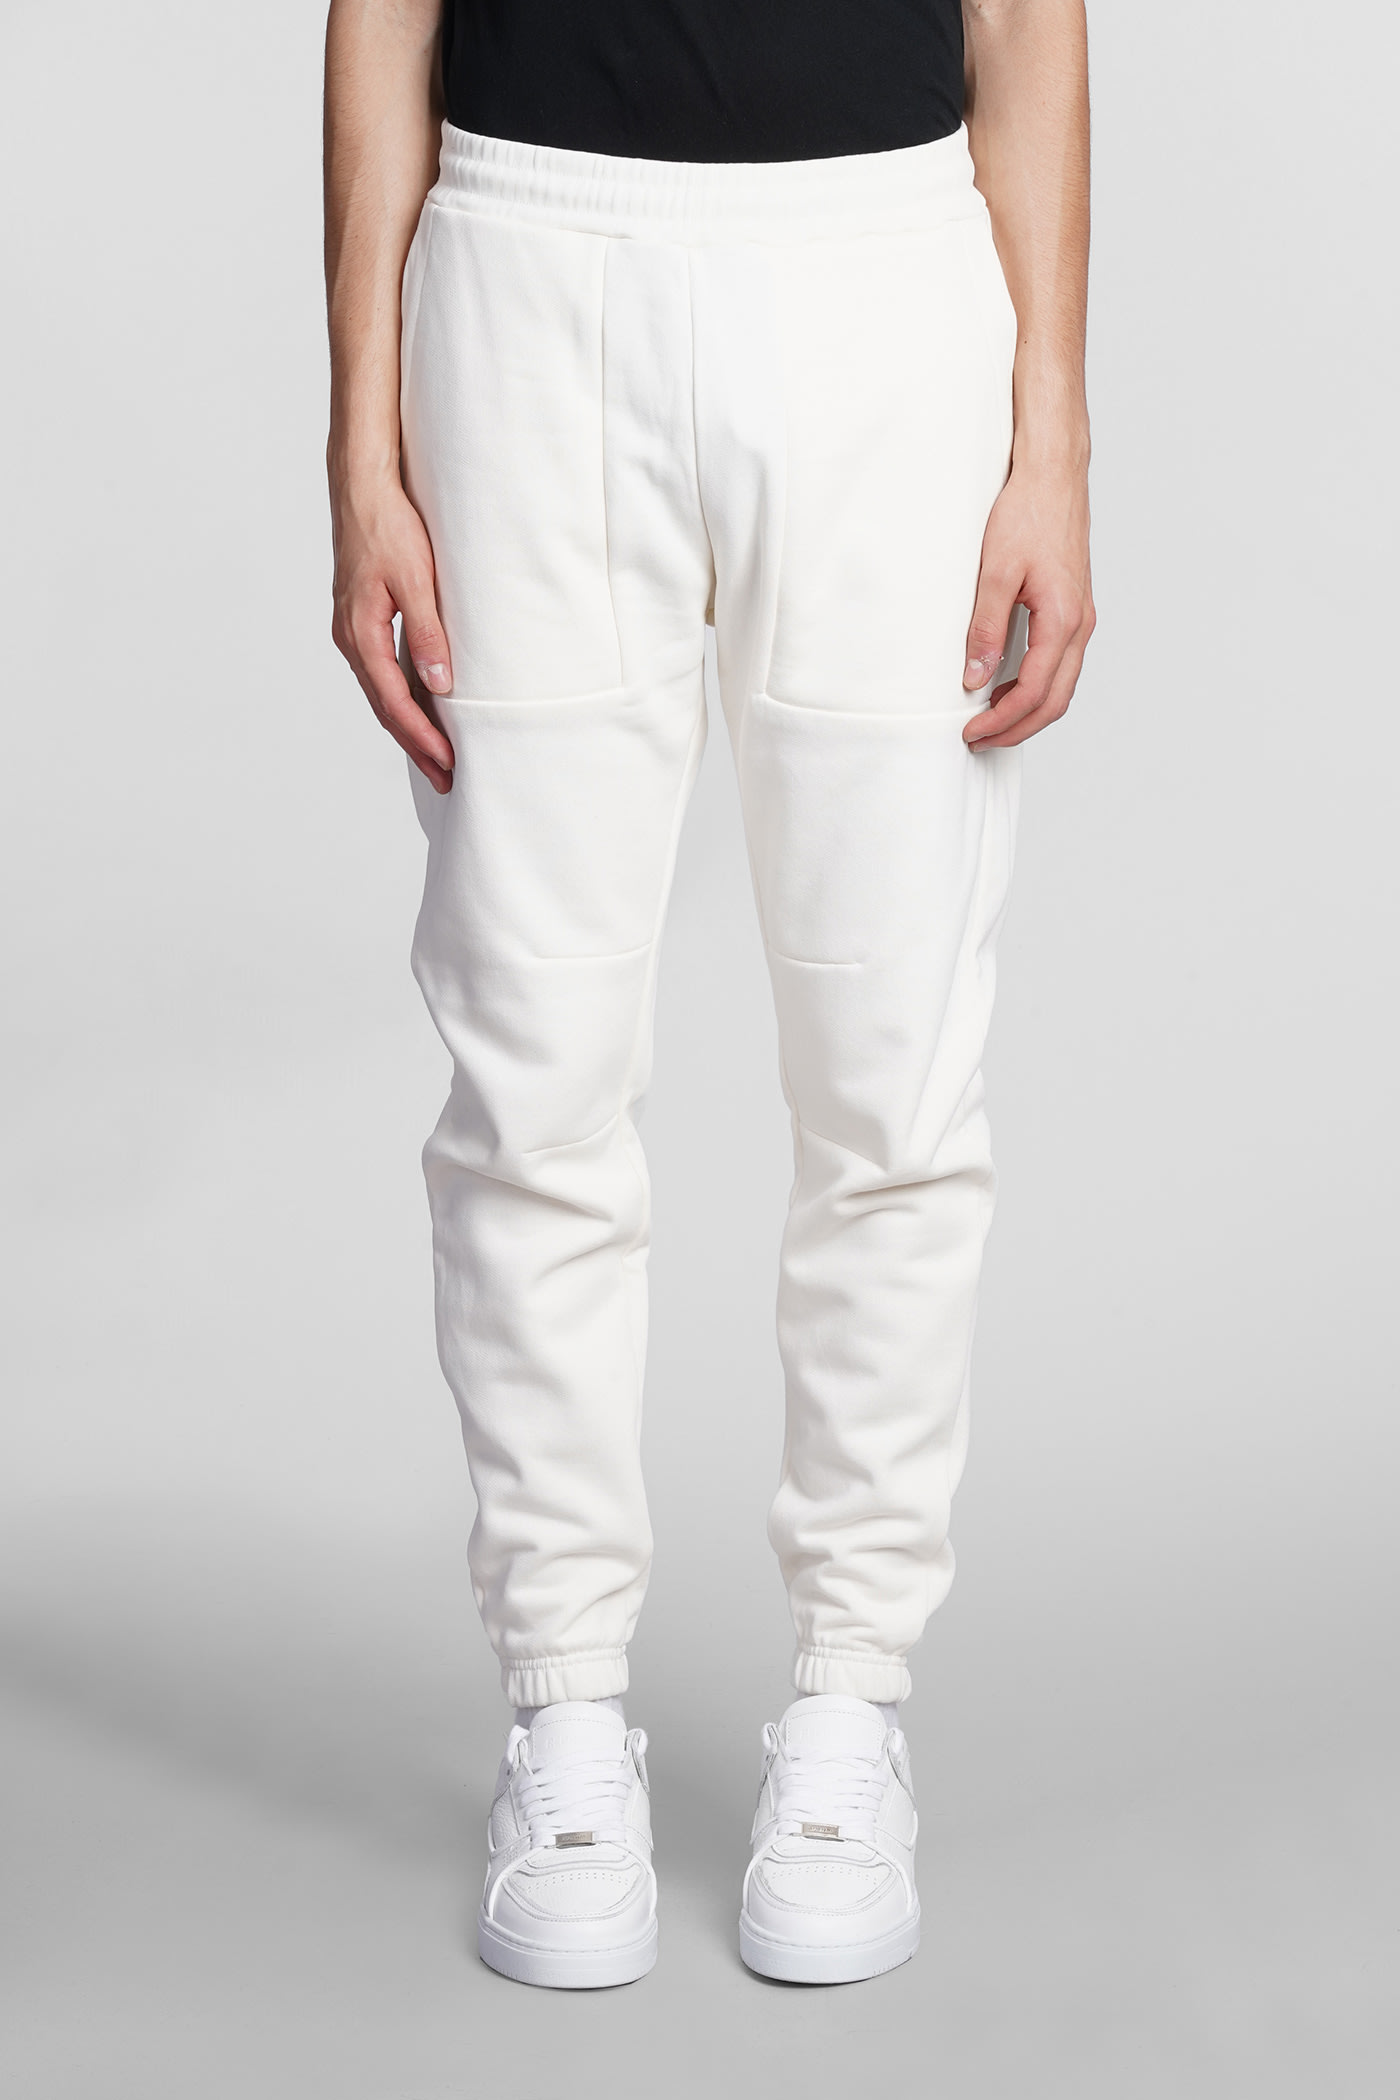 Low Brand Pants In White Cotton